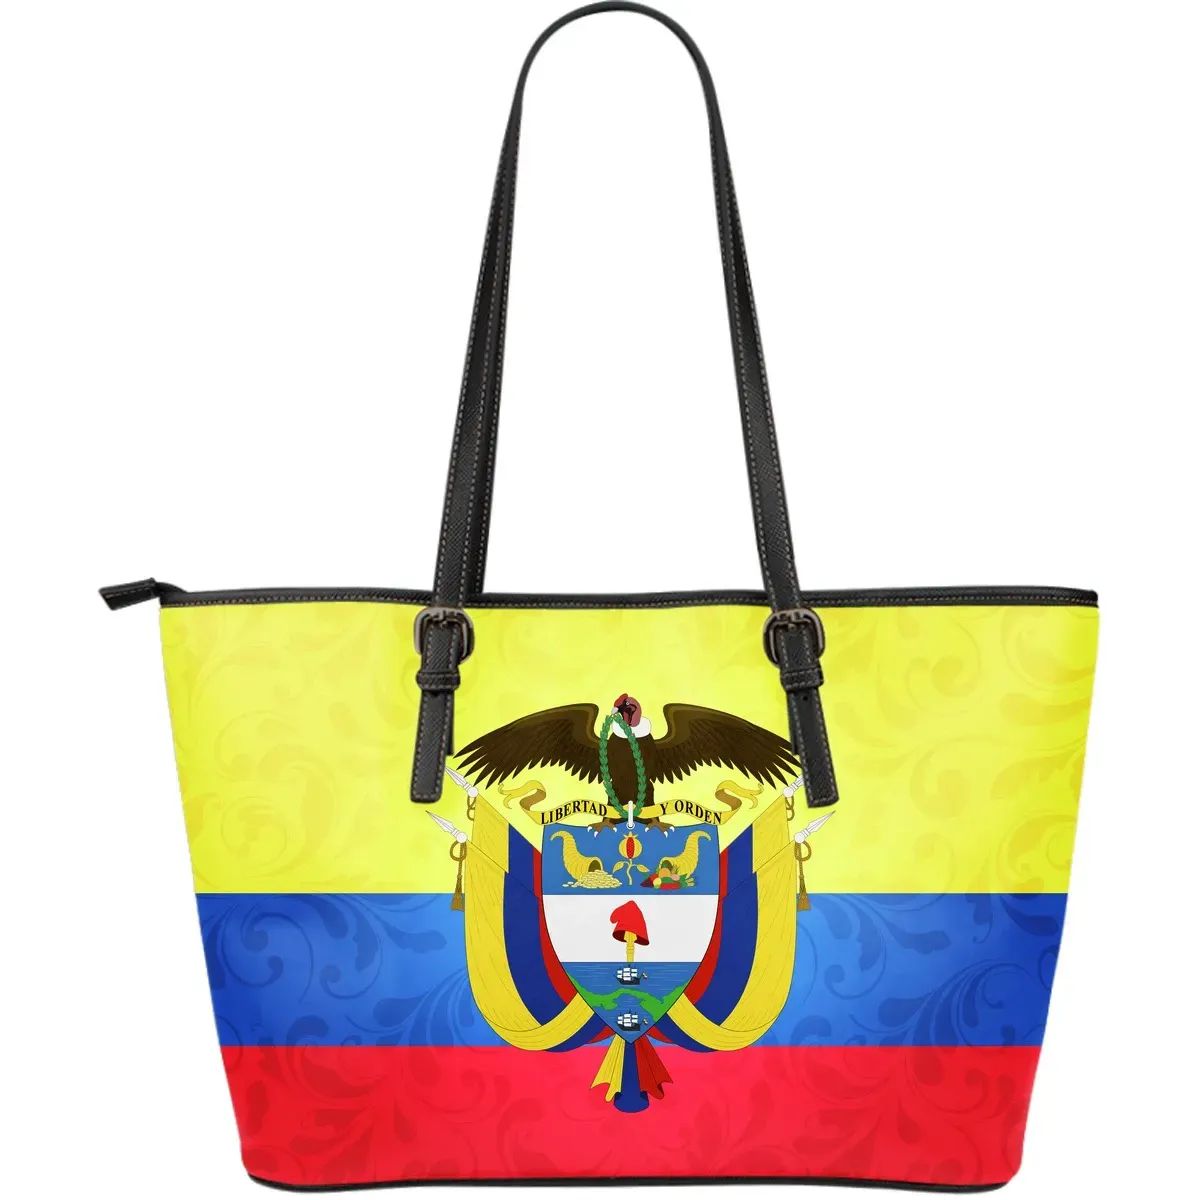 colombia-coat-of-arms-leather-tote-bag